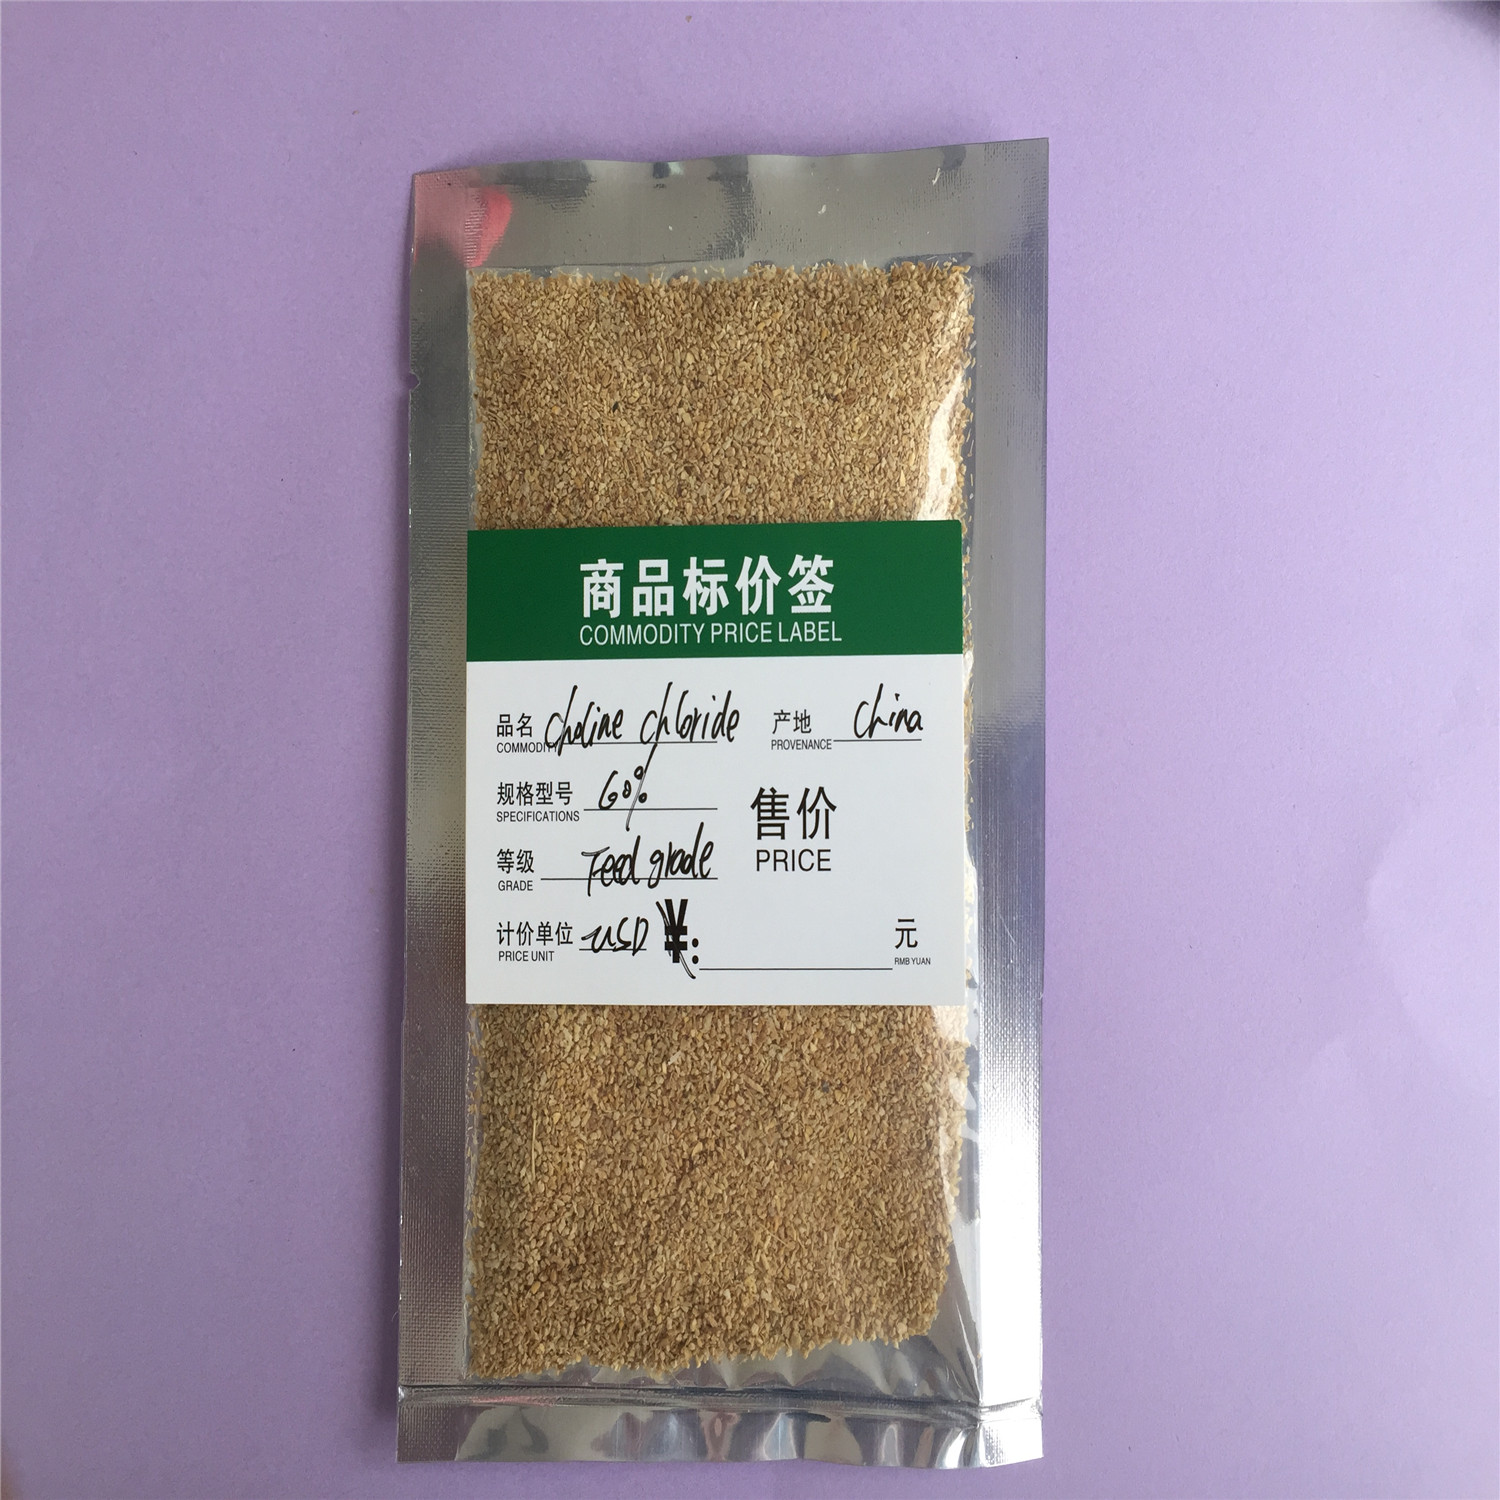 choline chloride corn cob carrier factory feed additive feed grade food grade for poultry feed